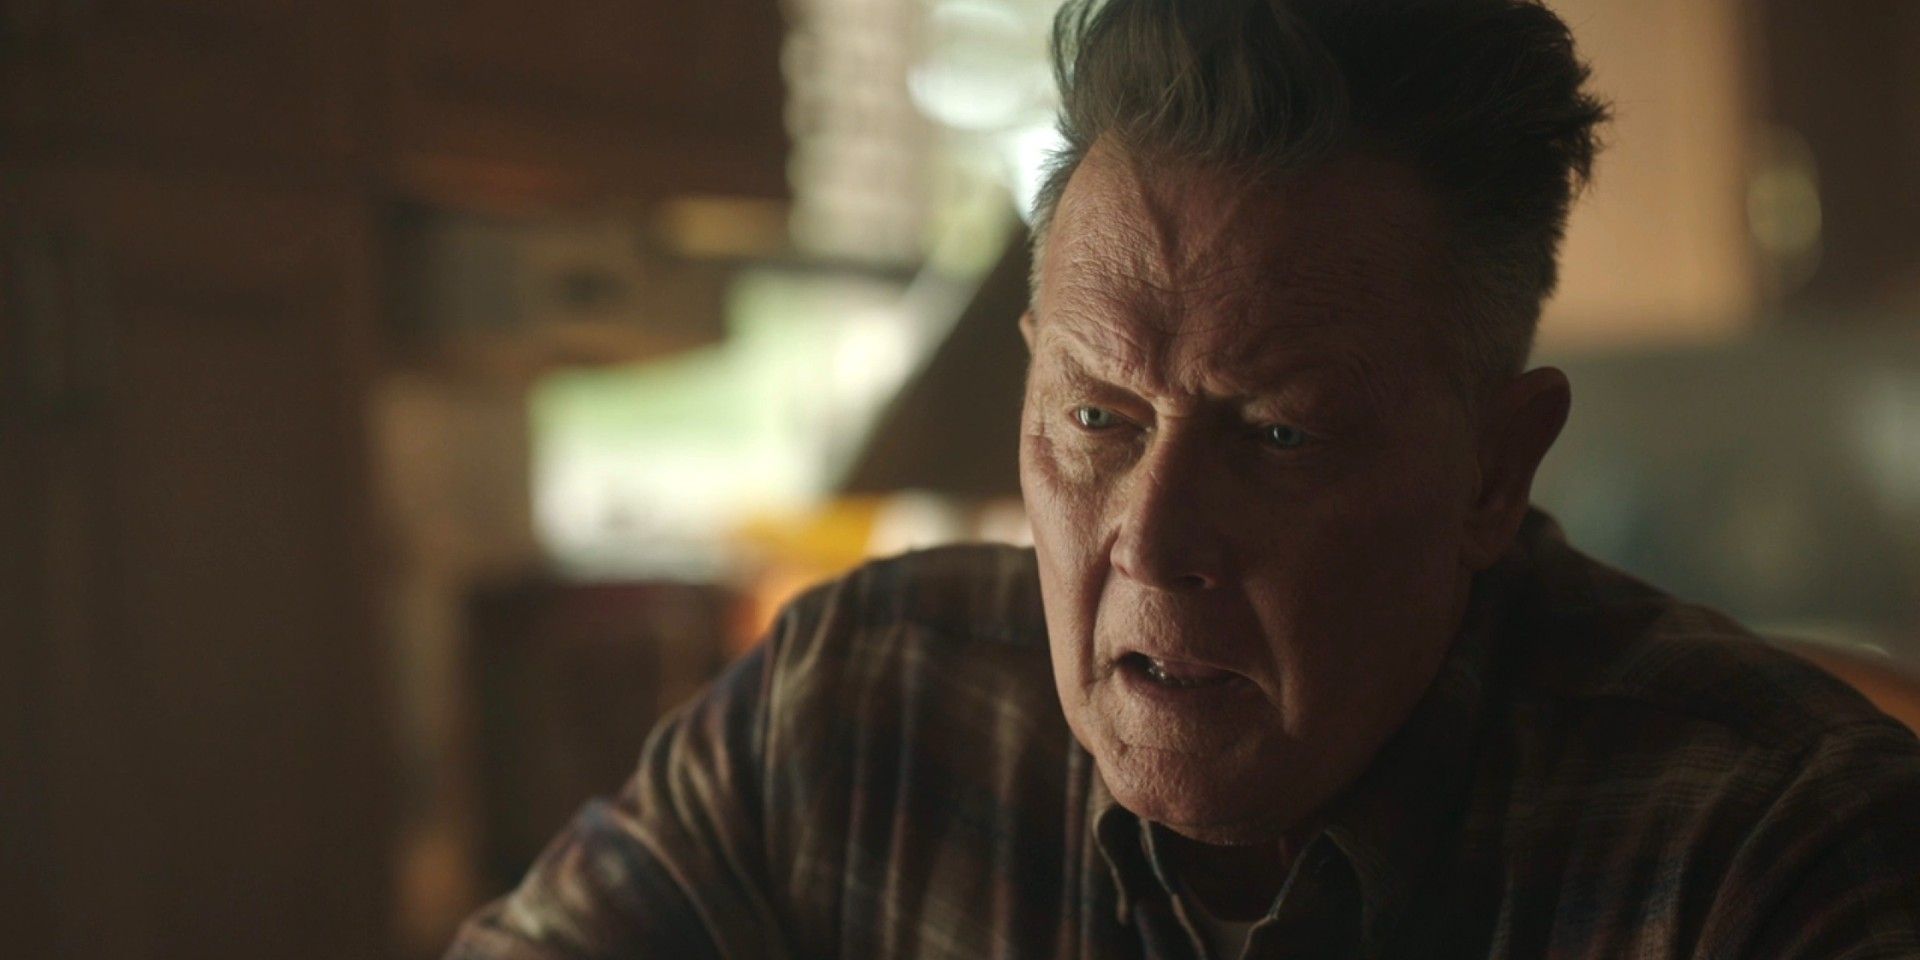 Robert Patrick as Auggie Smith in Peacemaker